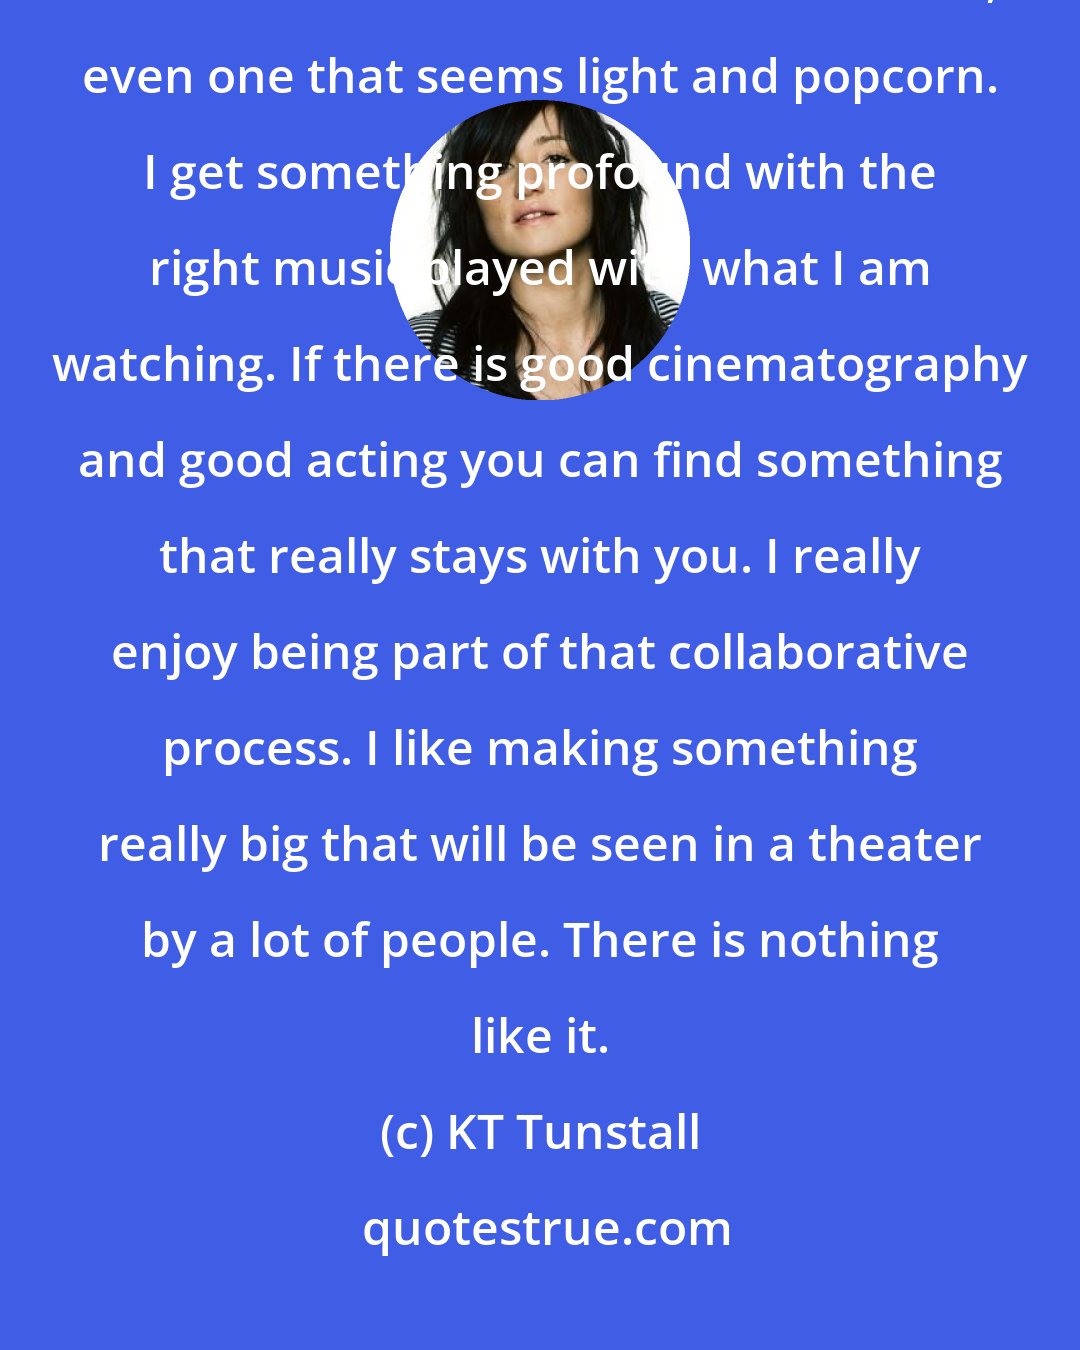 KT Tunstall: I am a huge fan of movies. It is my favorite thing during downtime. I get completely lost in films. I find them transformative, even one that seems light and popcorn. I get something profound with the right music played with what I am watching. If there is good cinematography and good acting you can find something that really stays with you. I really enjoy being part of that collaborative process. I like making something really big that will be seen in a theater by a lot of people. There is nothing like it.